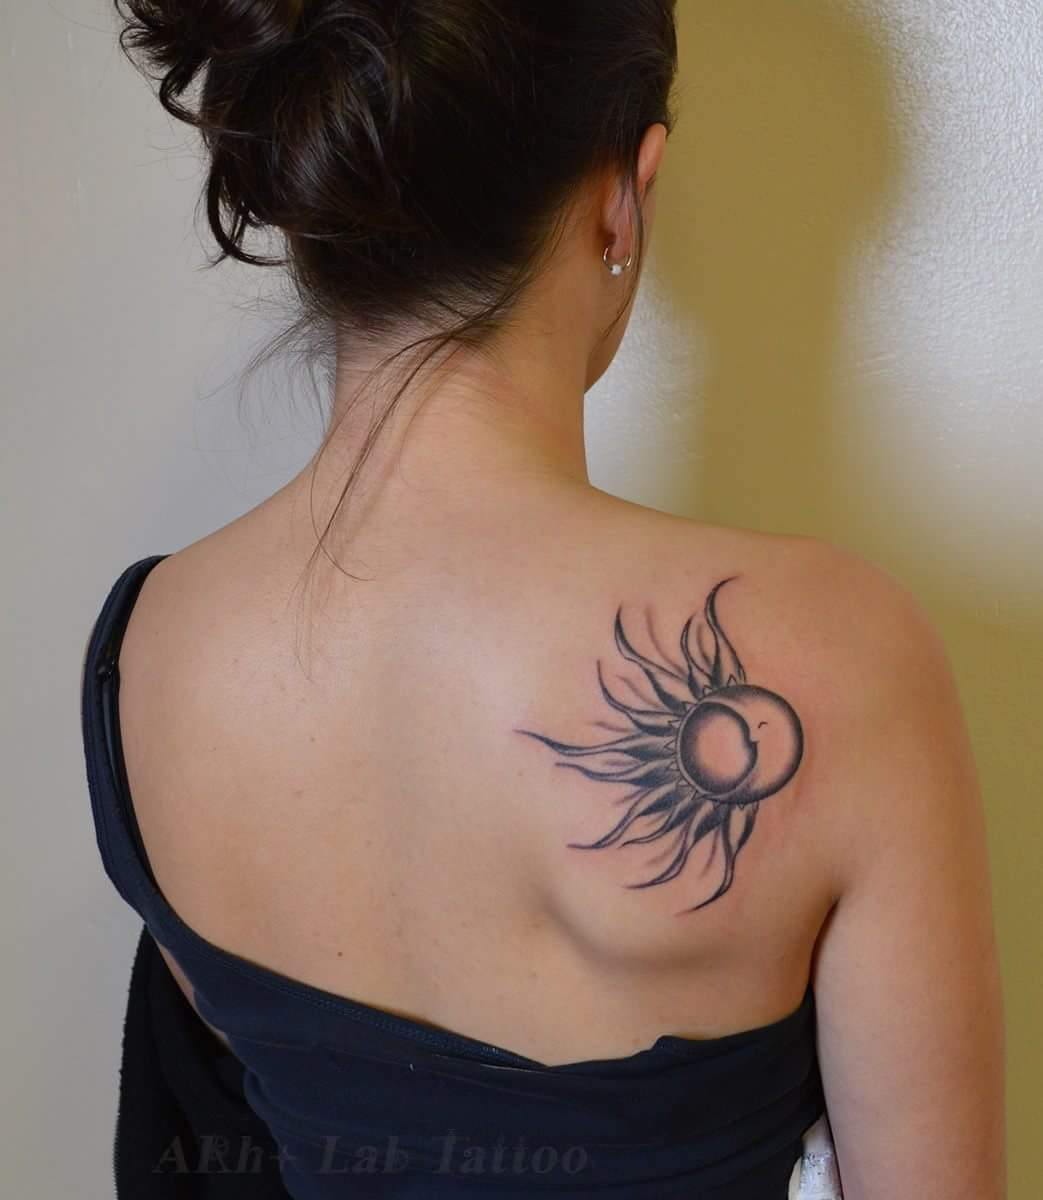 44 Alluring Shoulder Blade Tattoos To Flaunt With Off Shoulder Outfits pertaining to dimensions 1043 X 1200